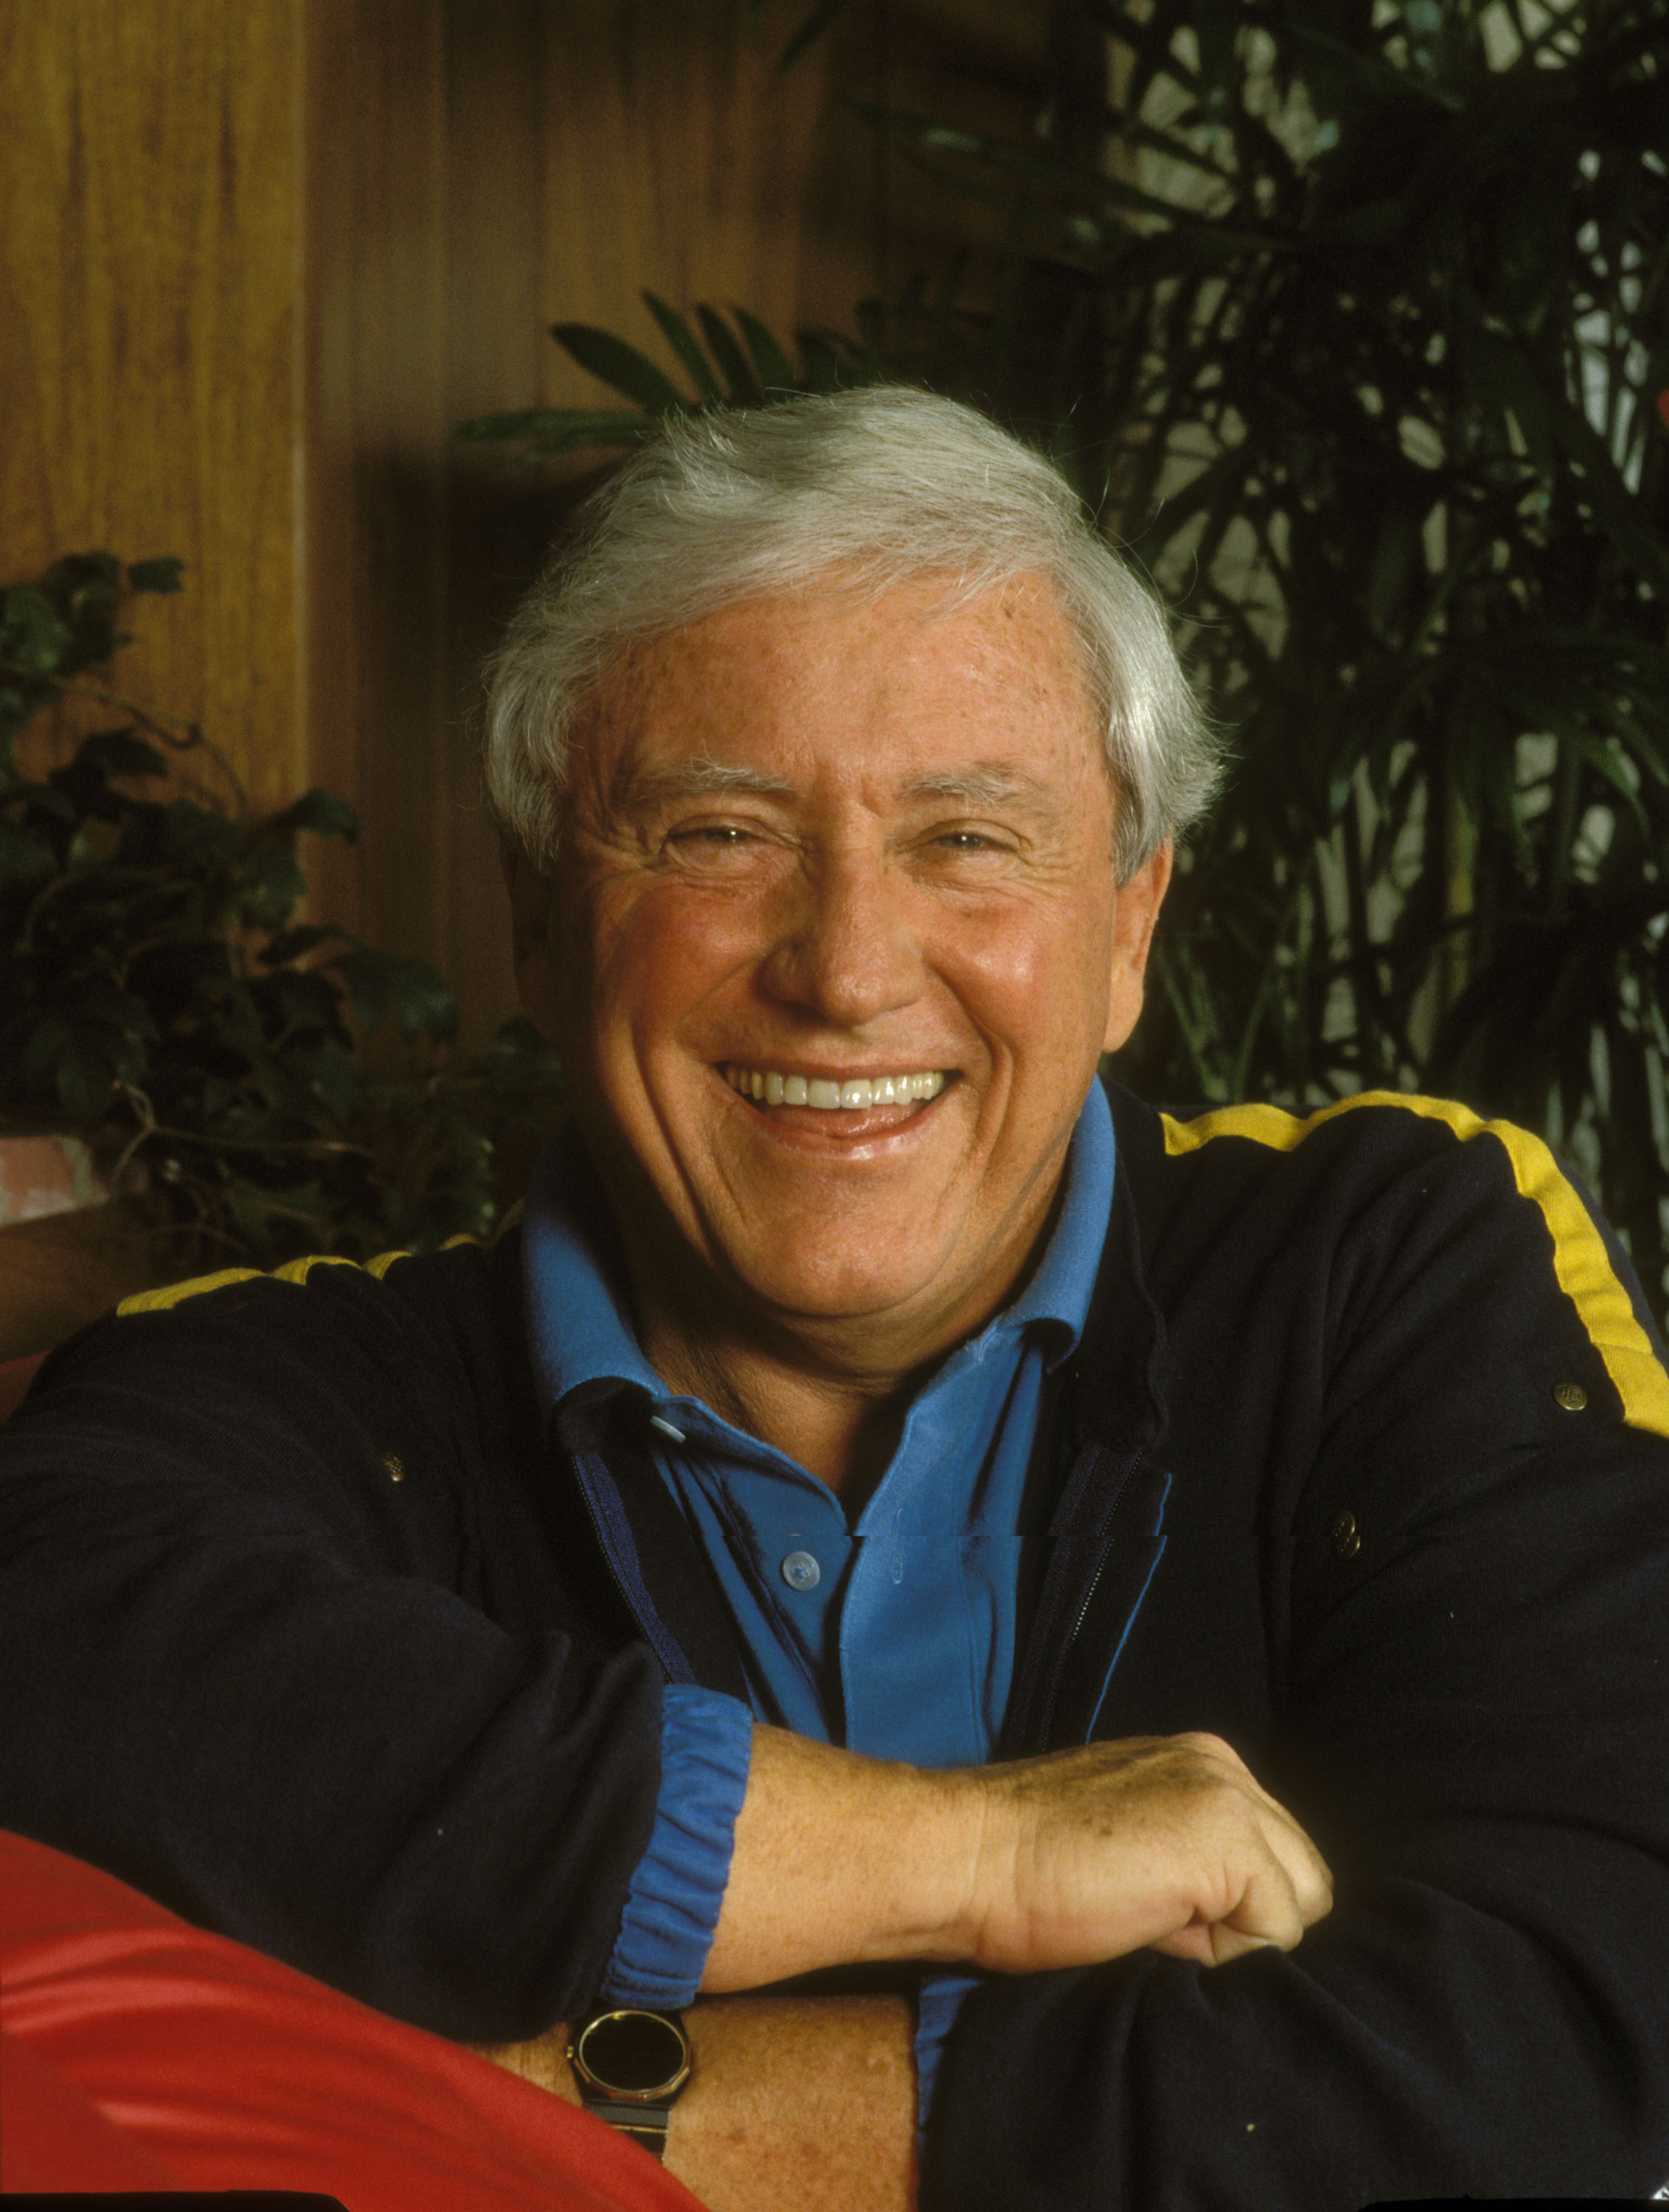 Merv Griffin poses for a portrait picture in 1985 | Source: Getty Images